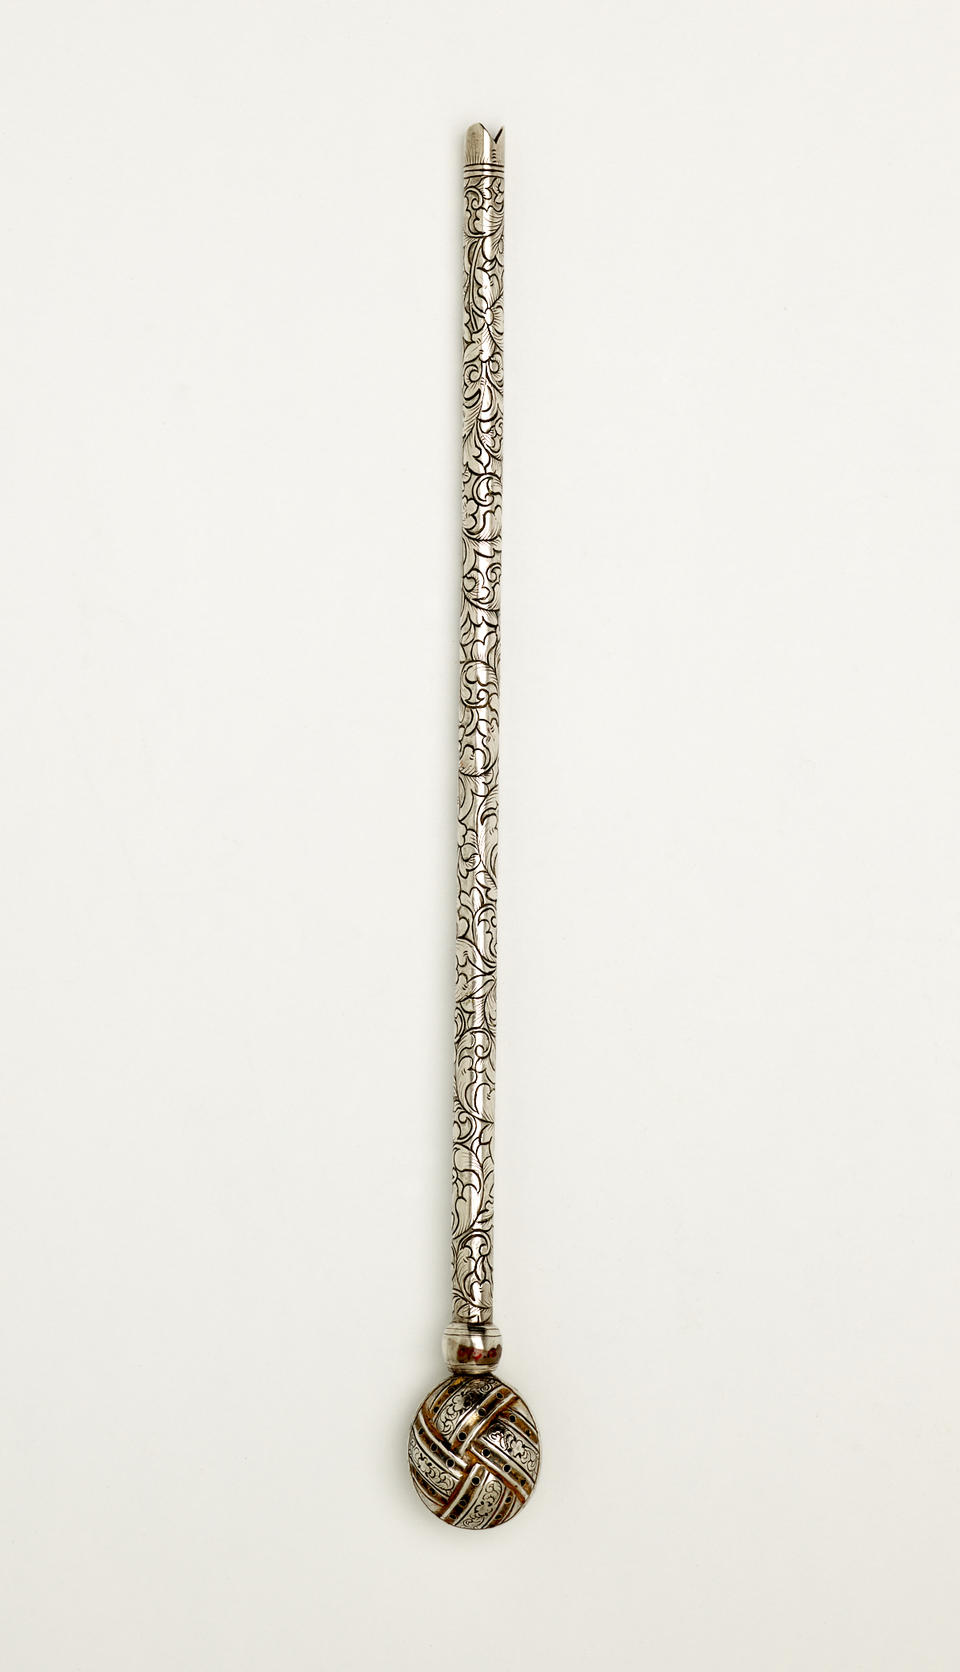 A long silver utensil used for tea with a decorative body and has one small bulbous end.